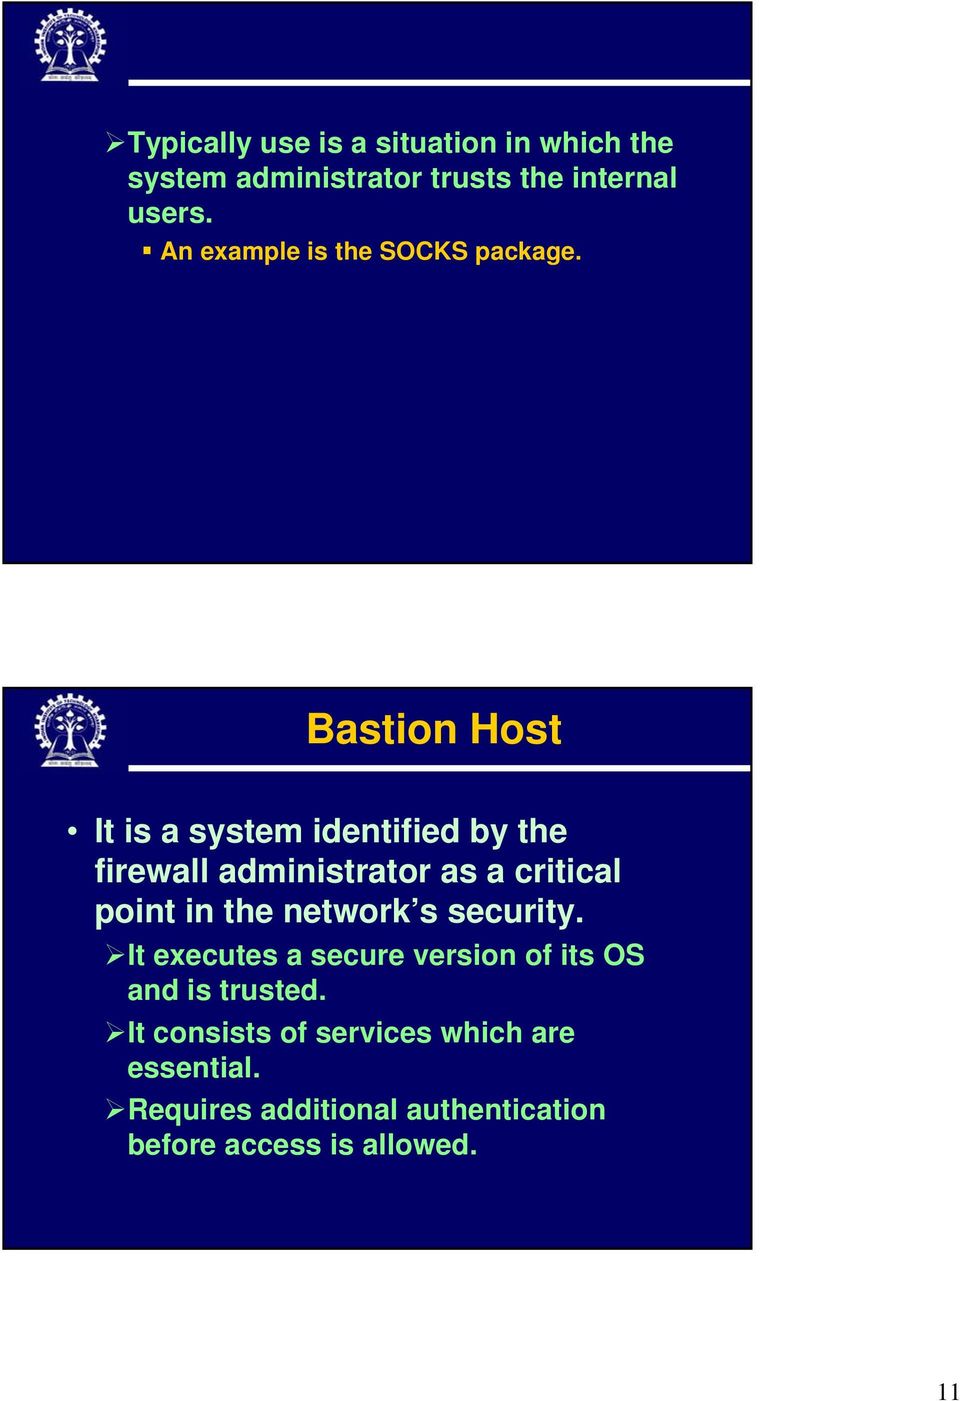 Bastion Host It is a system identified by the firewall administrator as a critical point in the